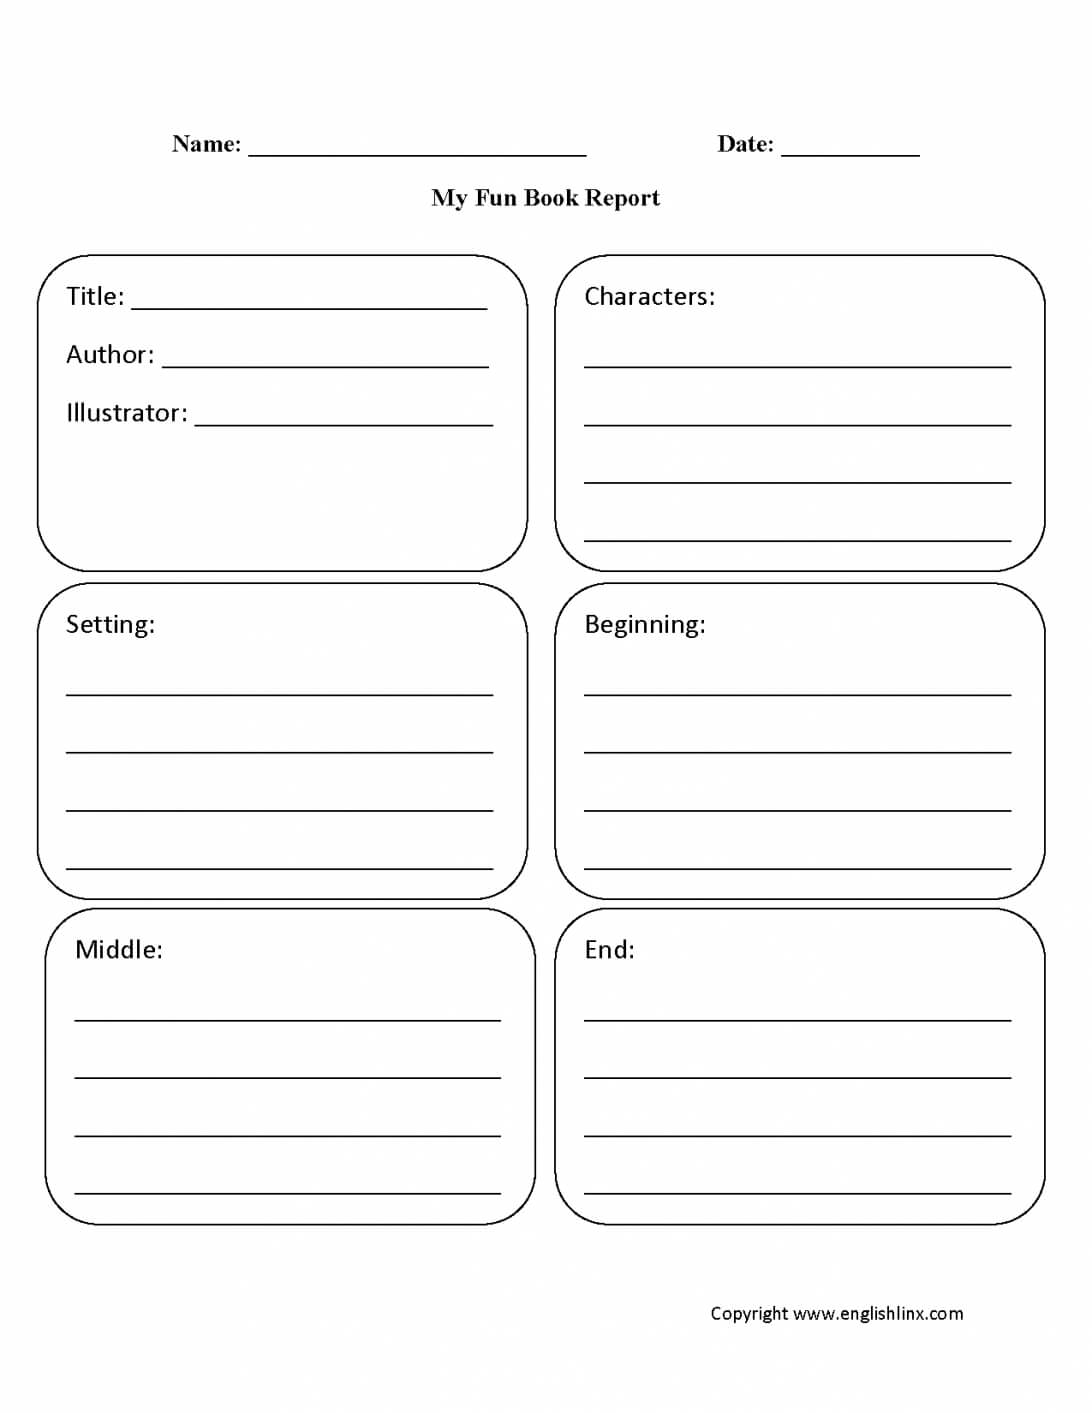 Book Report Template 011 Biography Ideas My Formidable High With Biography Book Report Template